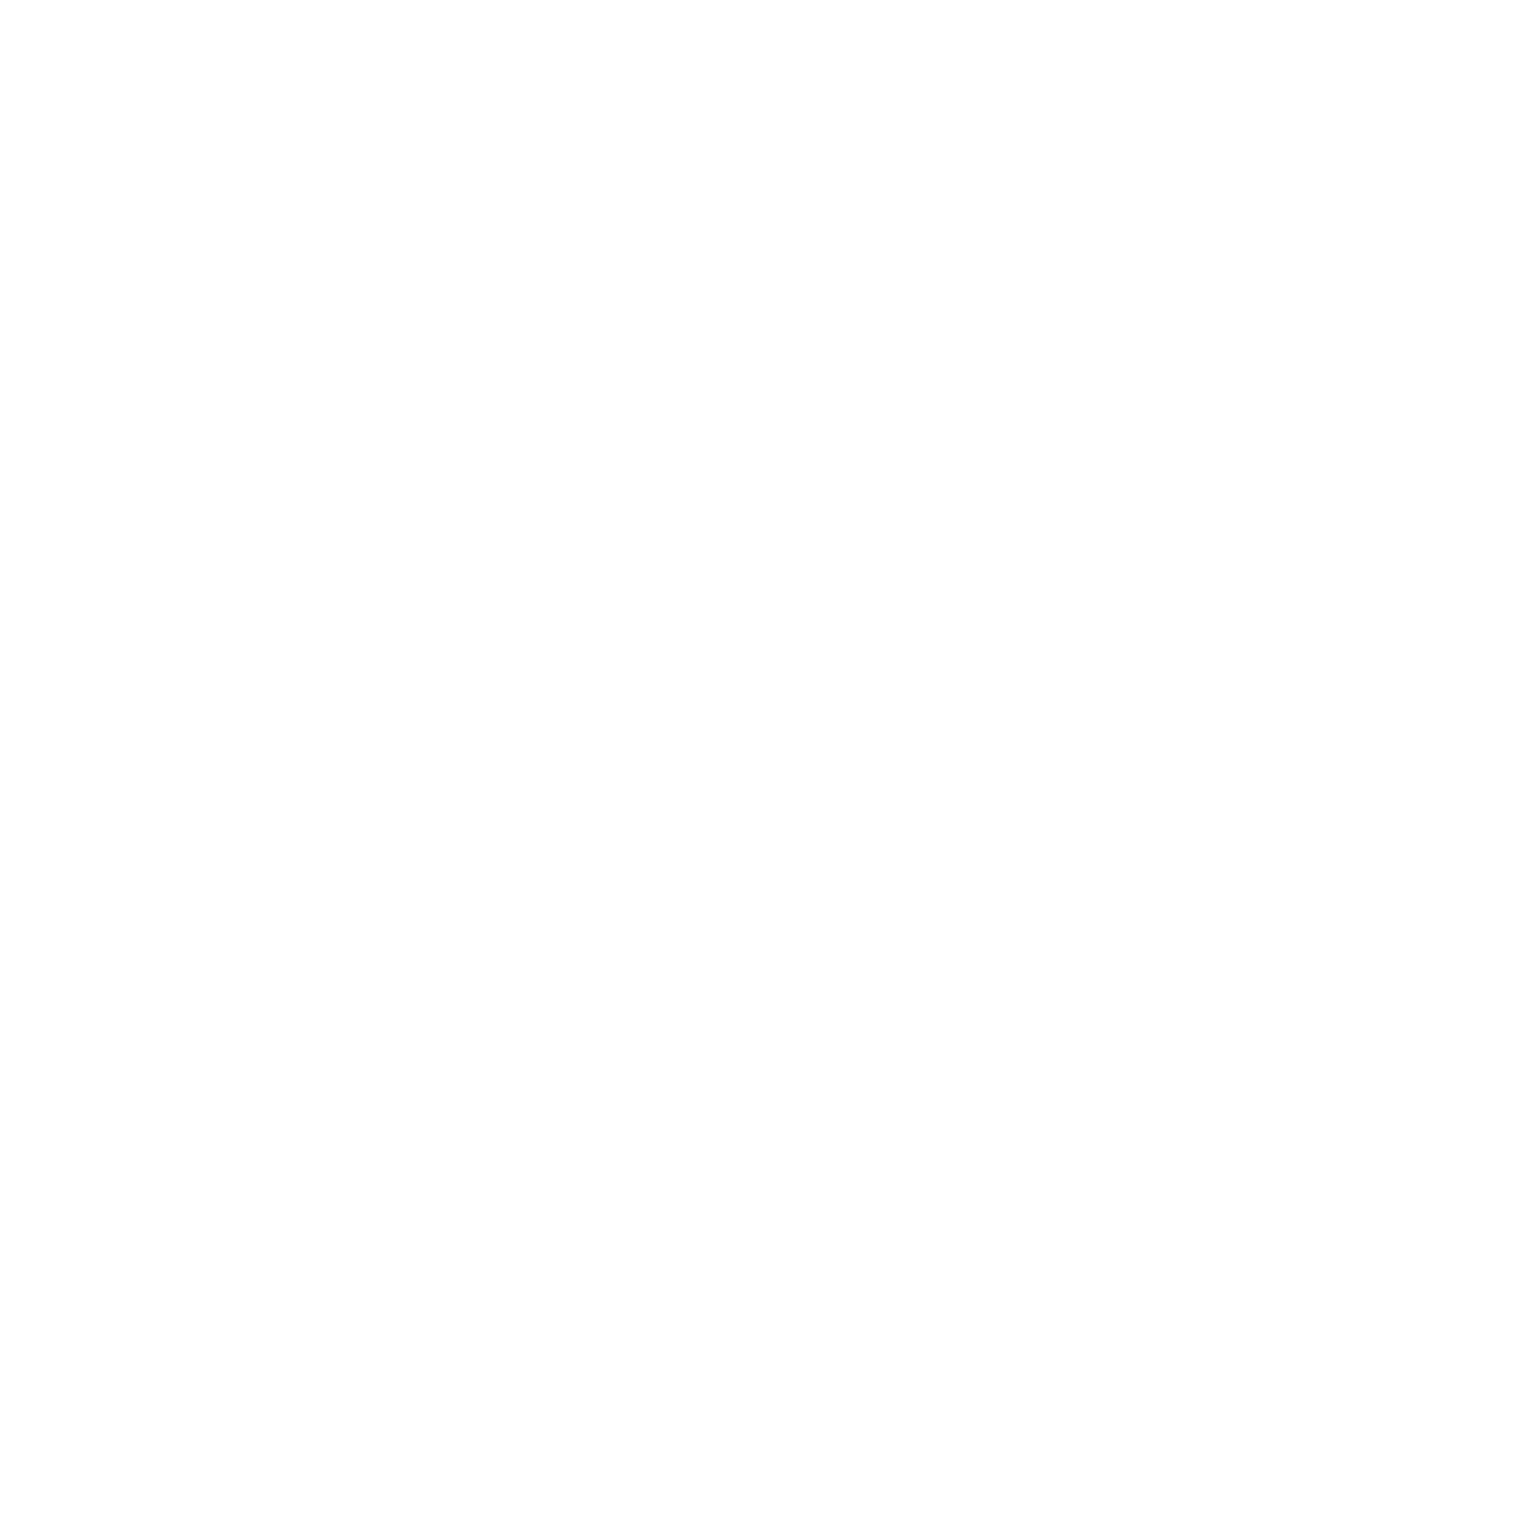 Dow Jones & Company logo large for dark backgrounds (transparent PNG)